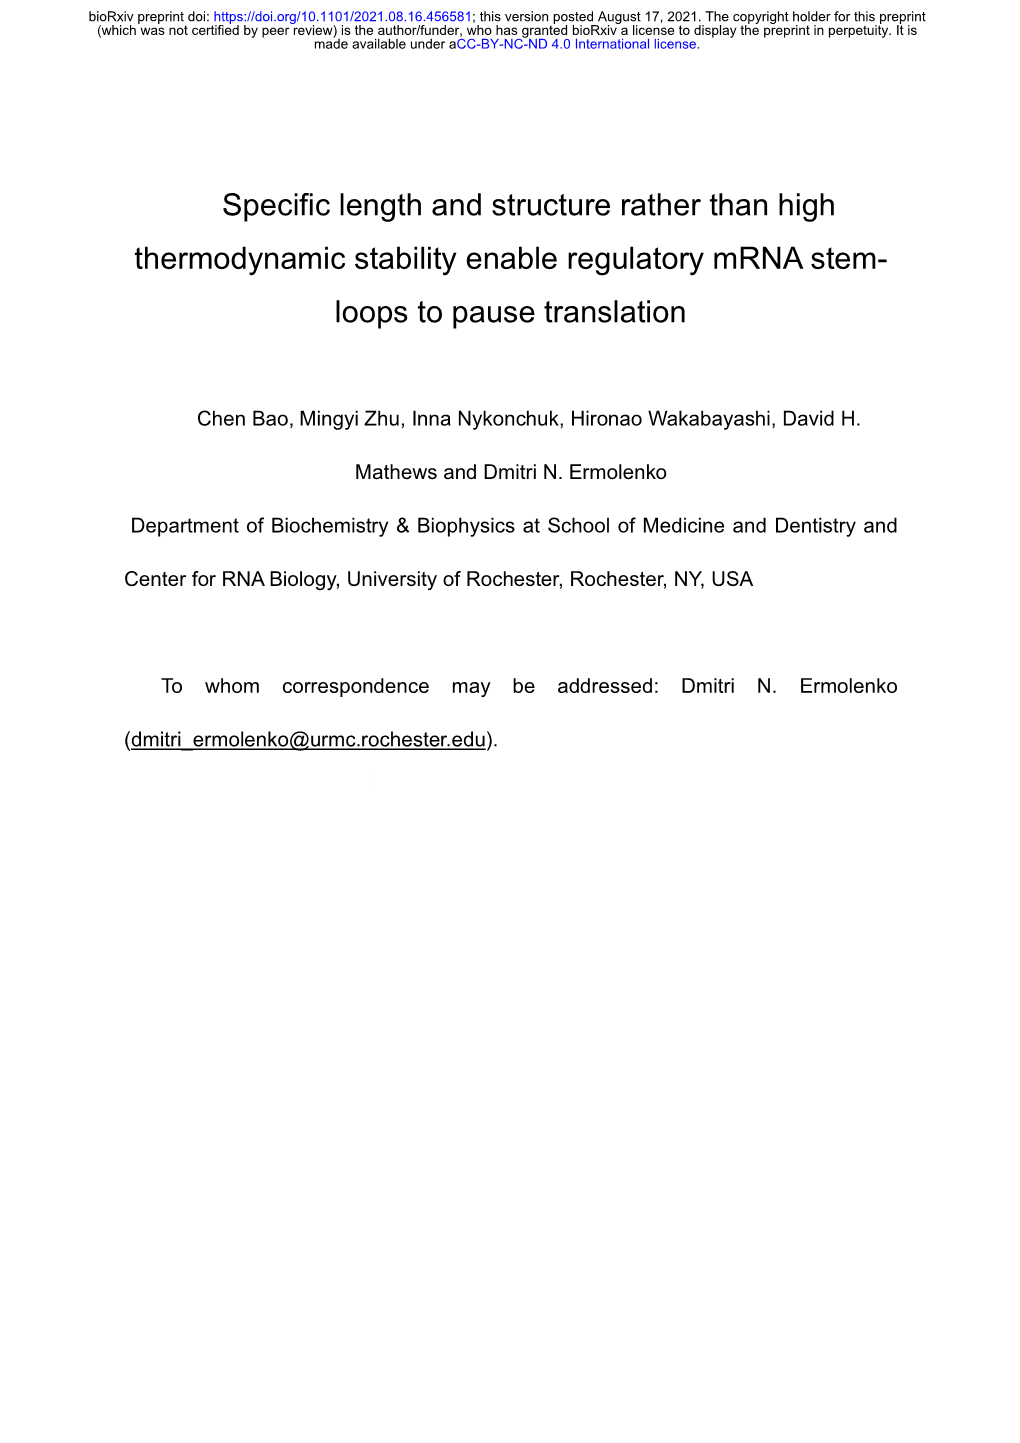 Specific Length and Structure Rather Than High Thermodynamic Stability Enable Regulatory Mrna Stem- Loops to Pause Translation